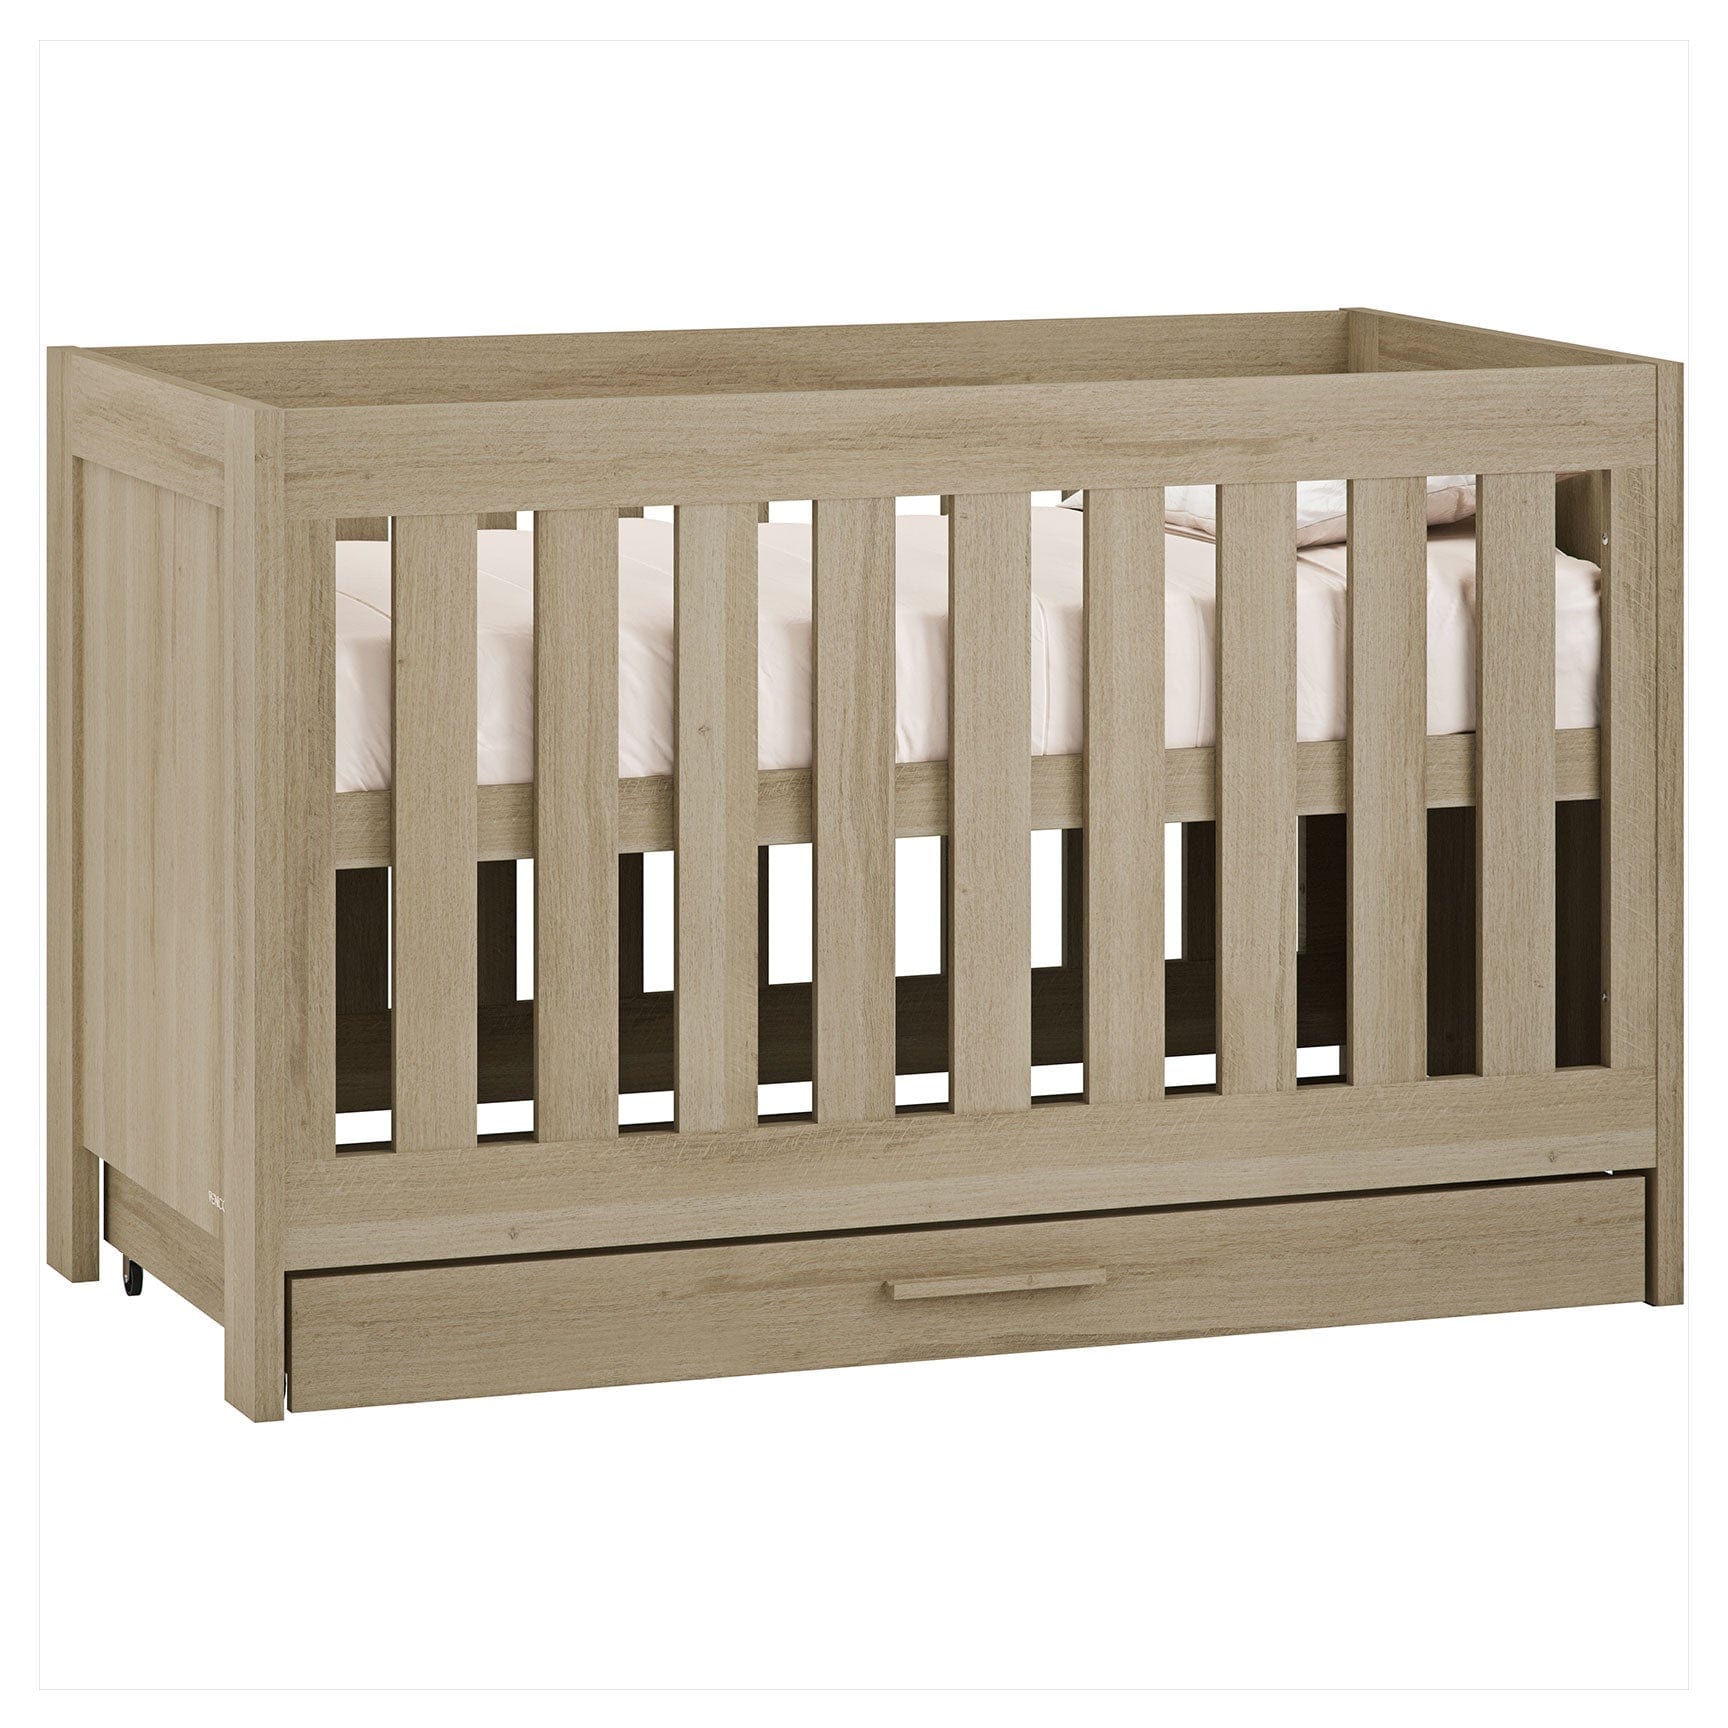 Venicci Forenzo Honey Oak Cot Bed with Drawer - Honey Oak Cot Beds